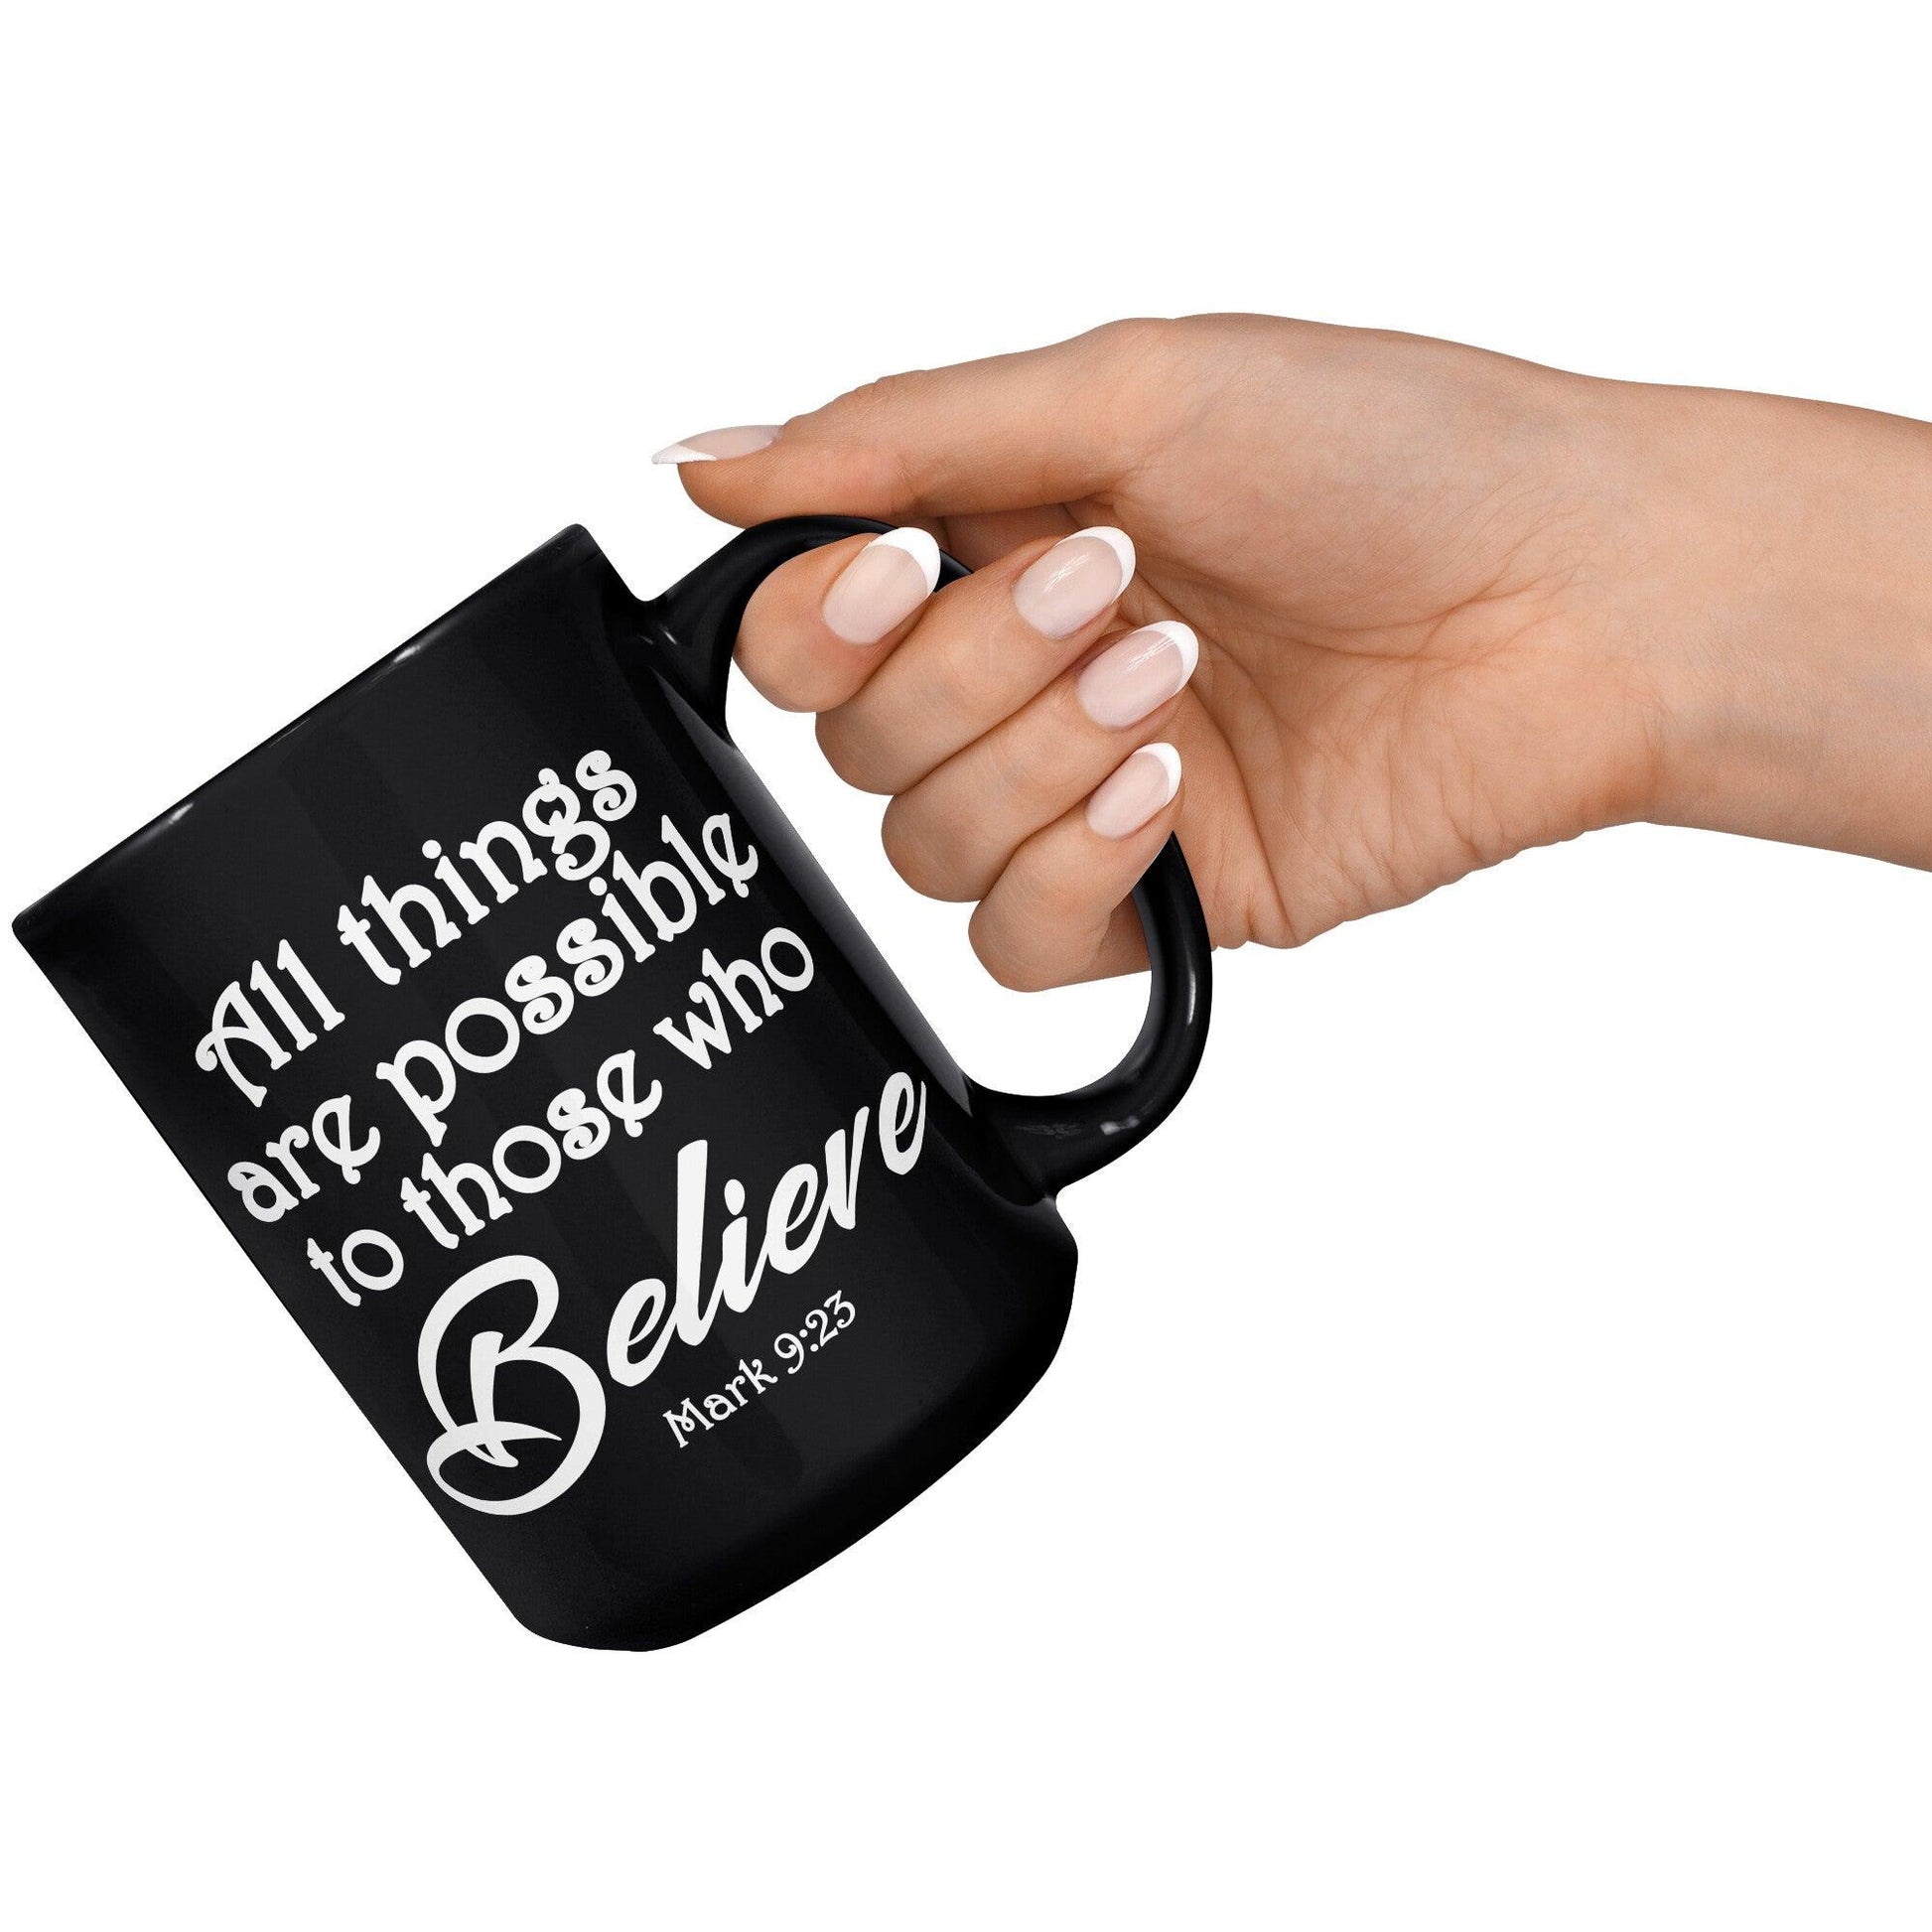 All things are possible to those who believe • Mark 9:23 Black Mug - TheGivenGet